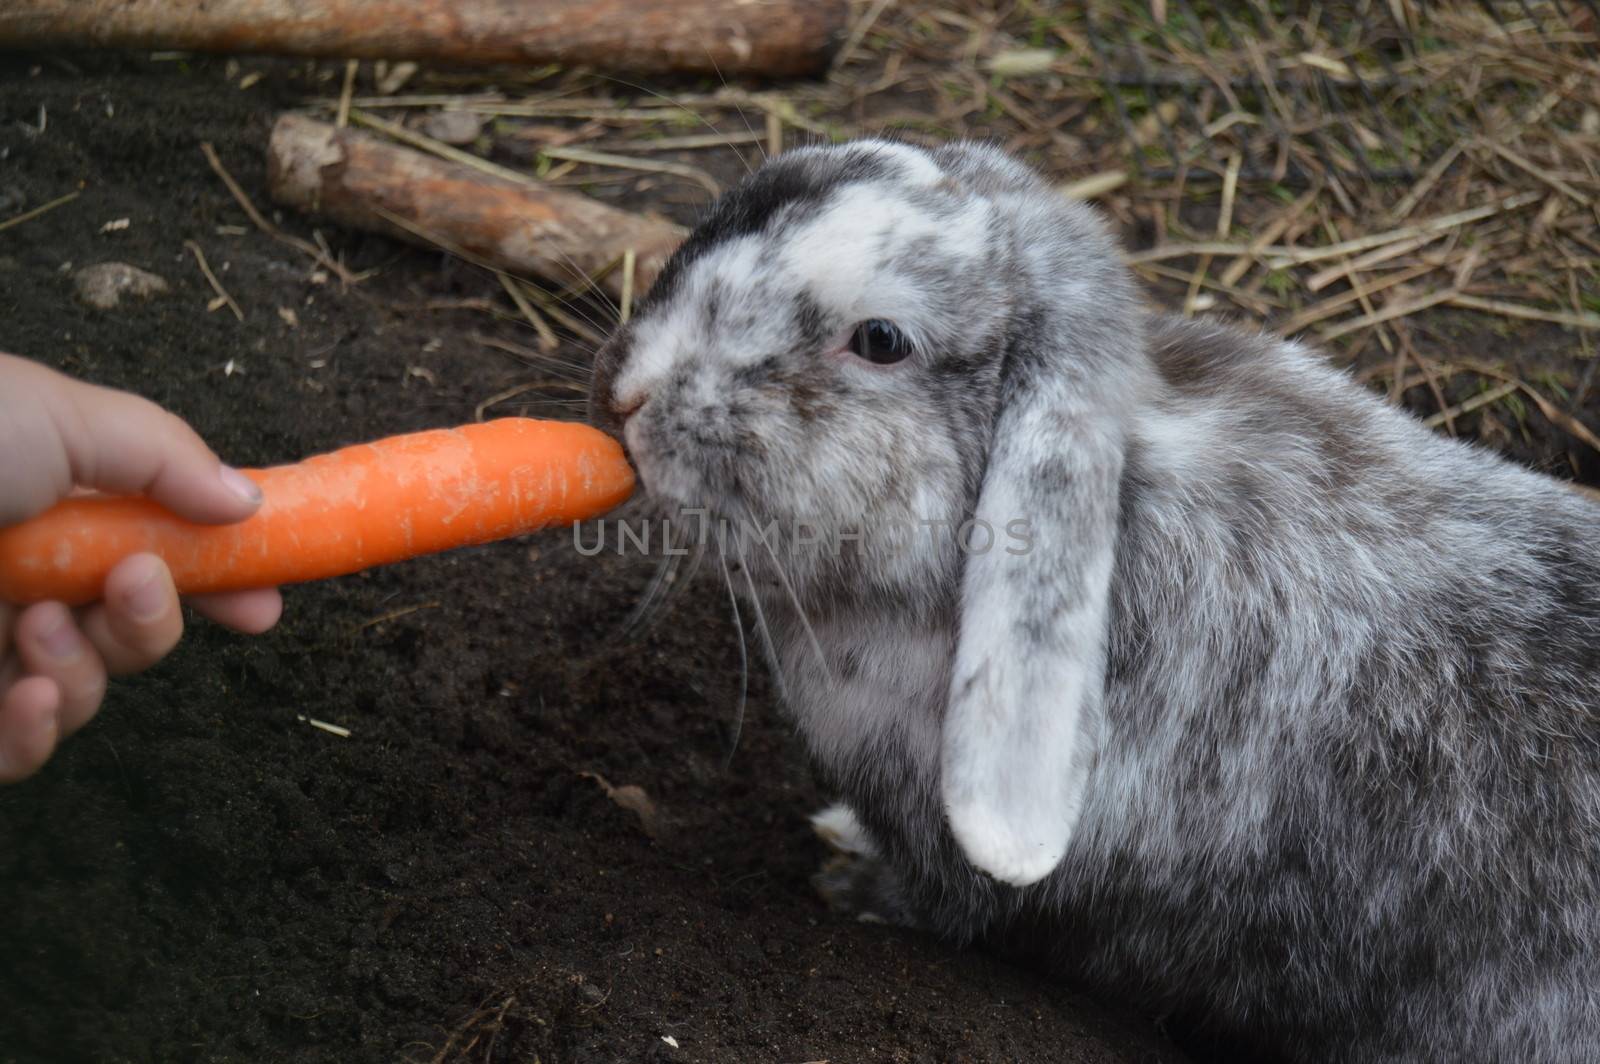 Holland Lop eating carrot by Meretemy@hotmail.com